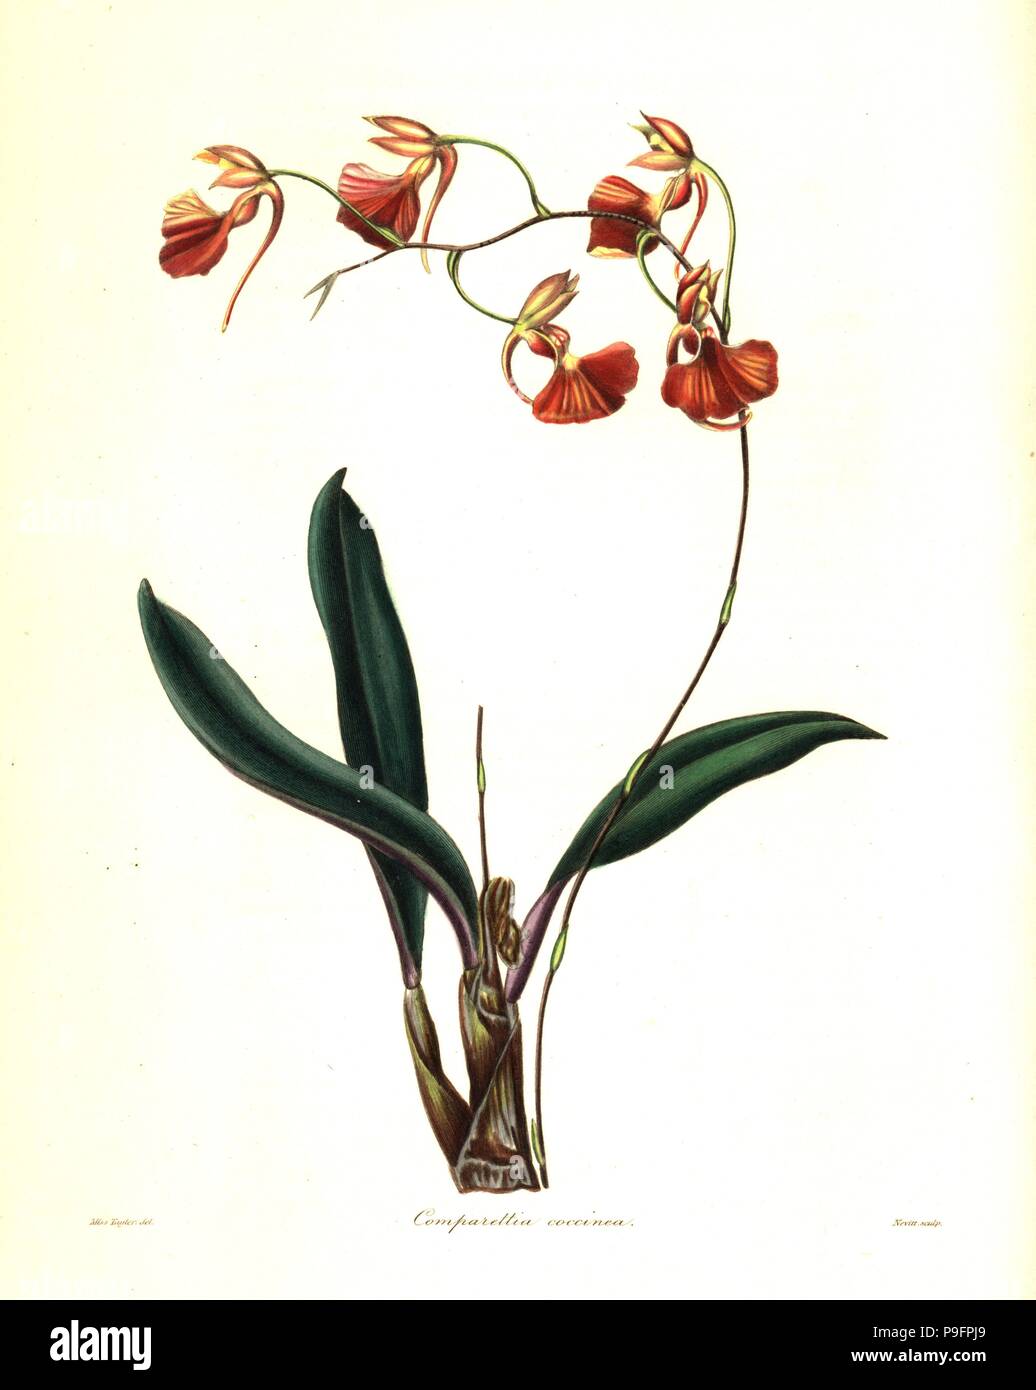 Crimson-flowered comparettia orchid, Comparettia coccinea. Handcoloured copperplate engraving by S. Nevitt after a botanical illustration by Miss Jane Taylor from Benjamin Maund and the Rev. John Stevens Henslow's The Botanist, London, 1836. Stock Photo